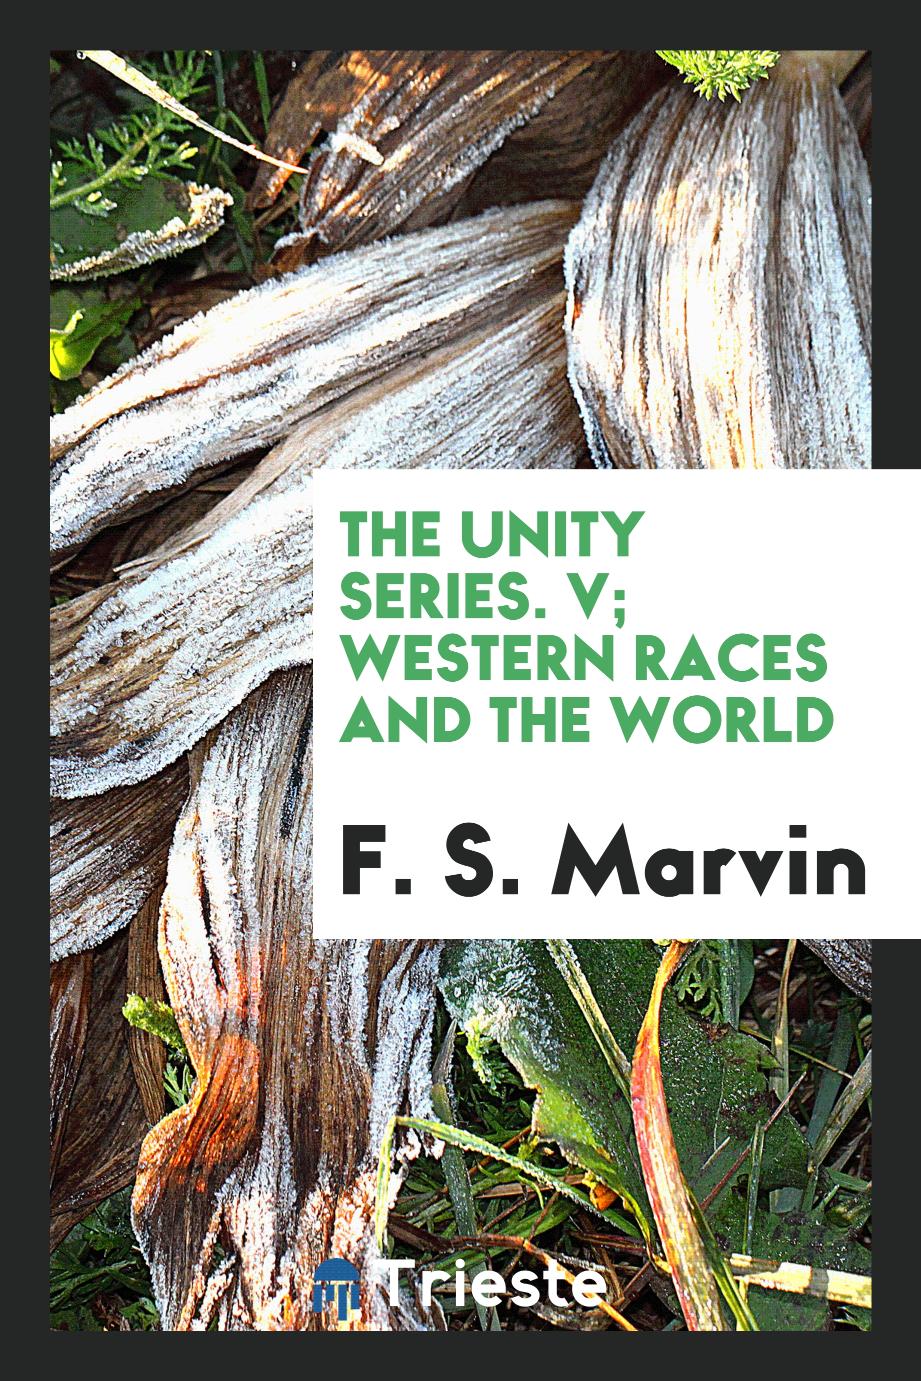 The unity series. V; Western races and the world